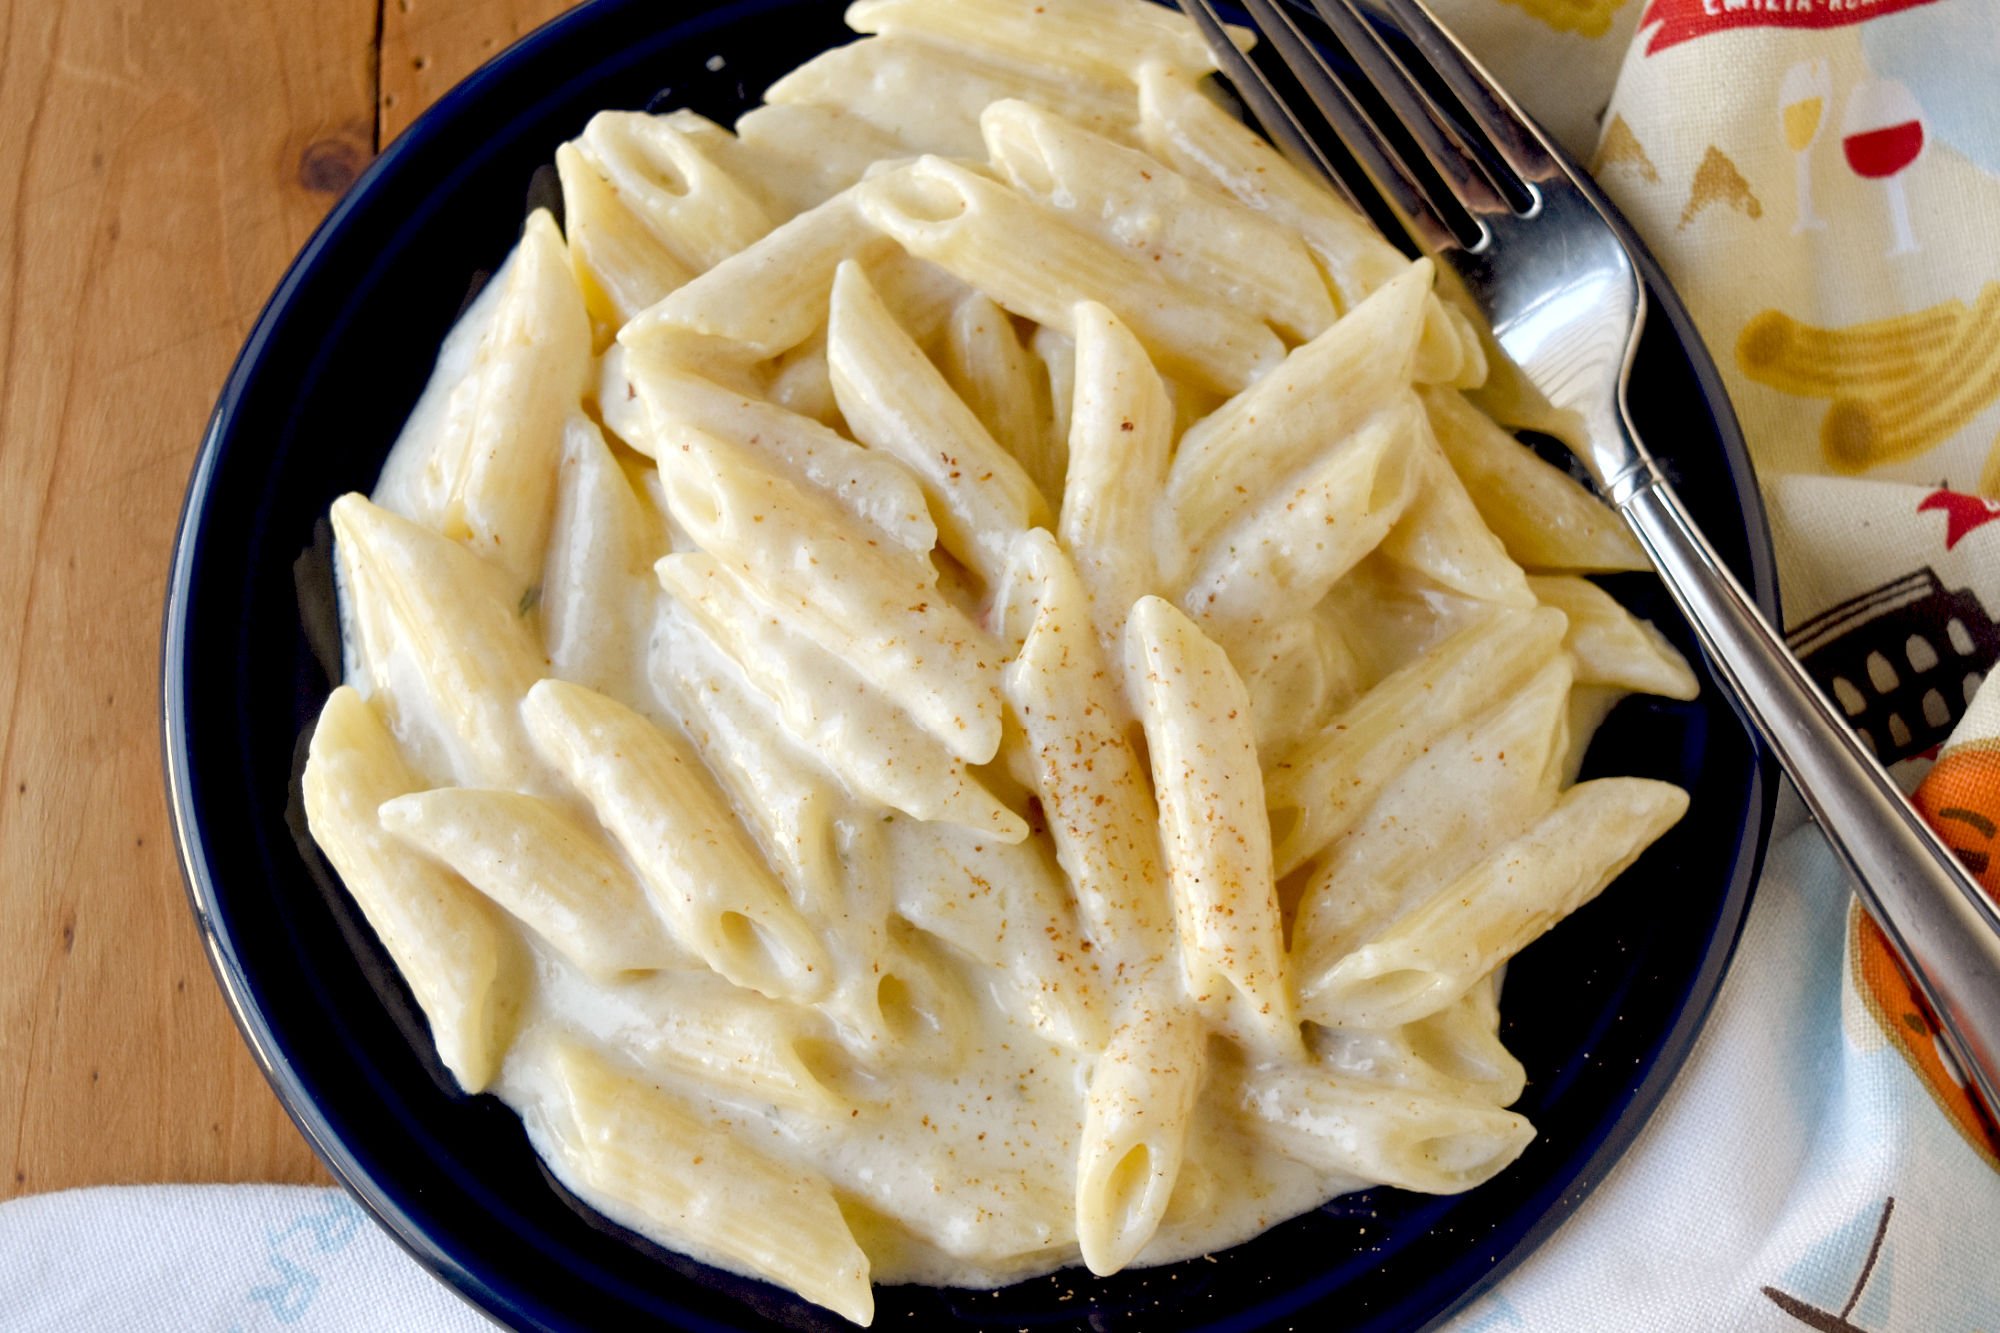 Easy Alfredo Sauce has 3 ingredients. It’s easier and simpler than you think to make a restaurant quality Alfredo sauce that is lick the plate delicious. #DairyMonth #Alfredo